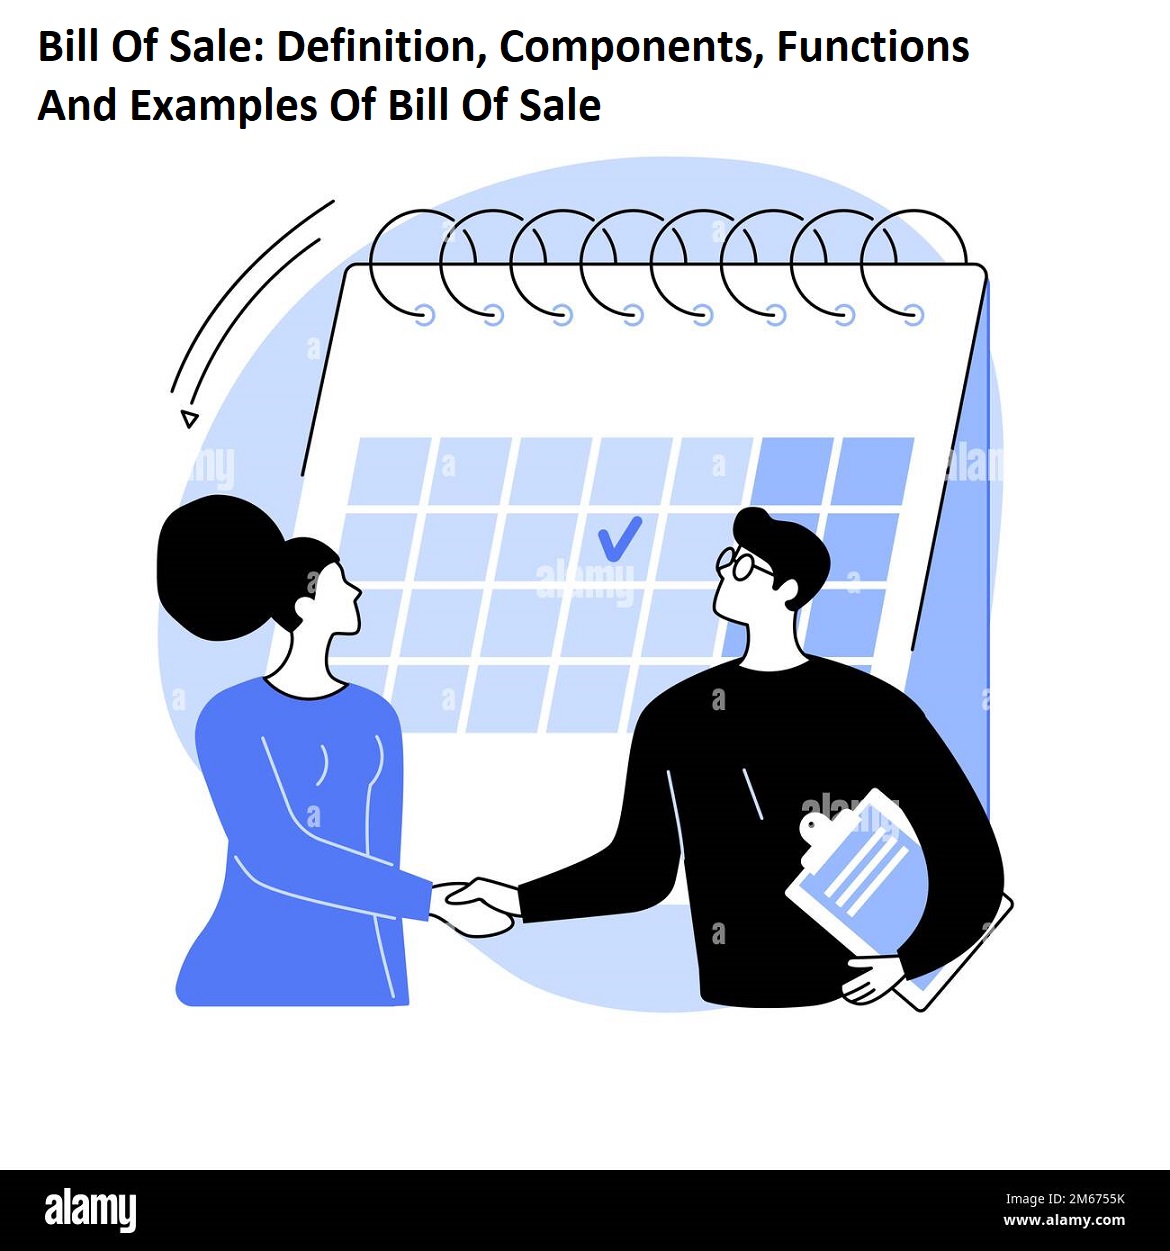 Bill Of Sale: Definition, Components, Functions And Examples Of Bill Of Sale